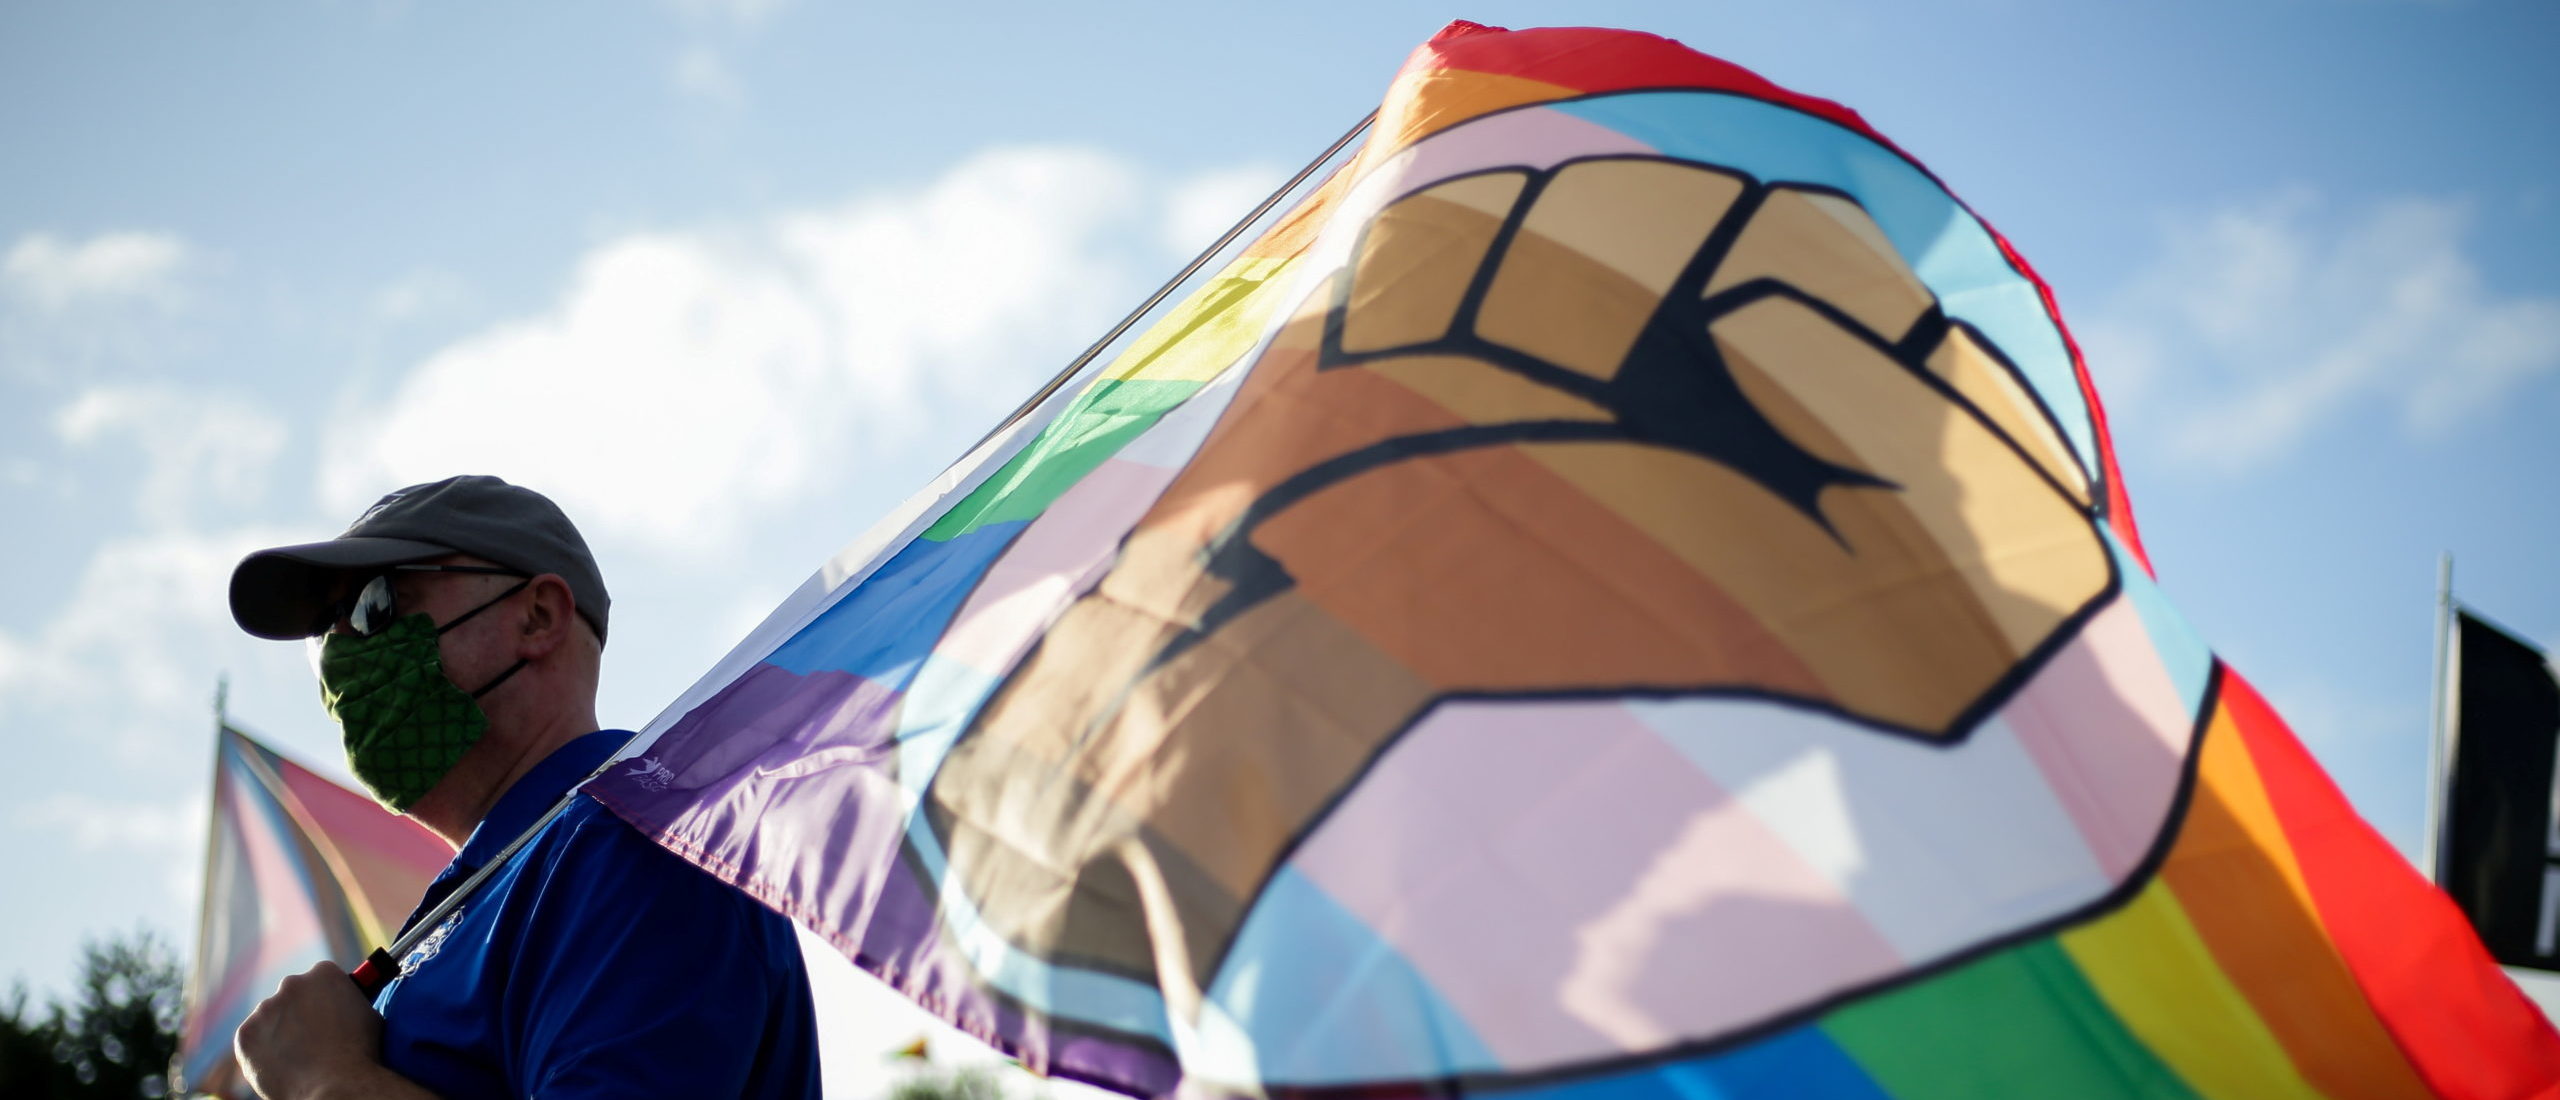 Matt Ogle of the Oregon Education Association holds a pride flag with a Black Lives Matter fist symbol as educators and supporters hold a rally to push back against the Newberg School Board's ban on educators displaying images or symbols that may be considered political or controversial, including LGBTQIA or Black Lives Matter symbols, in Newberg, Oregon, U.S. September 28, 2021. REUTERS/Lindsey Wasson